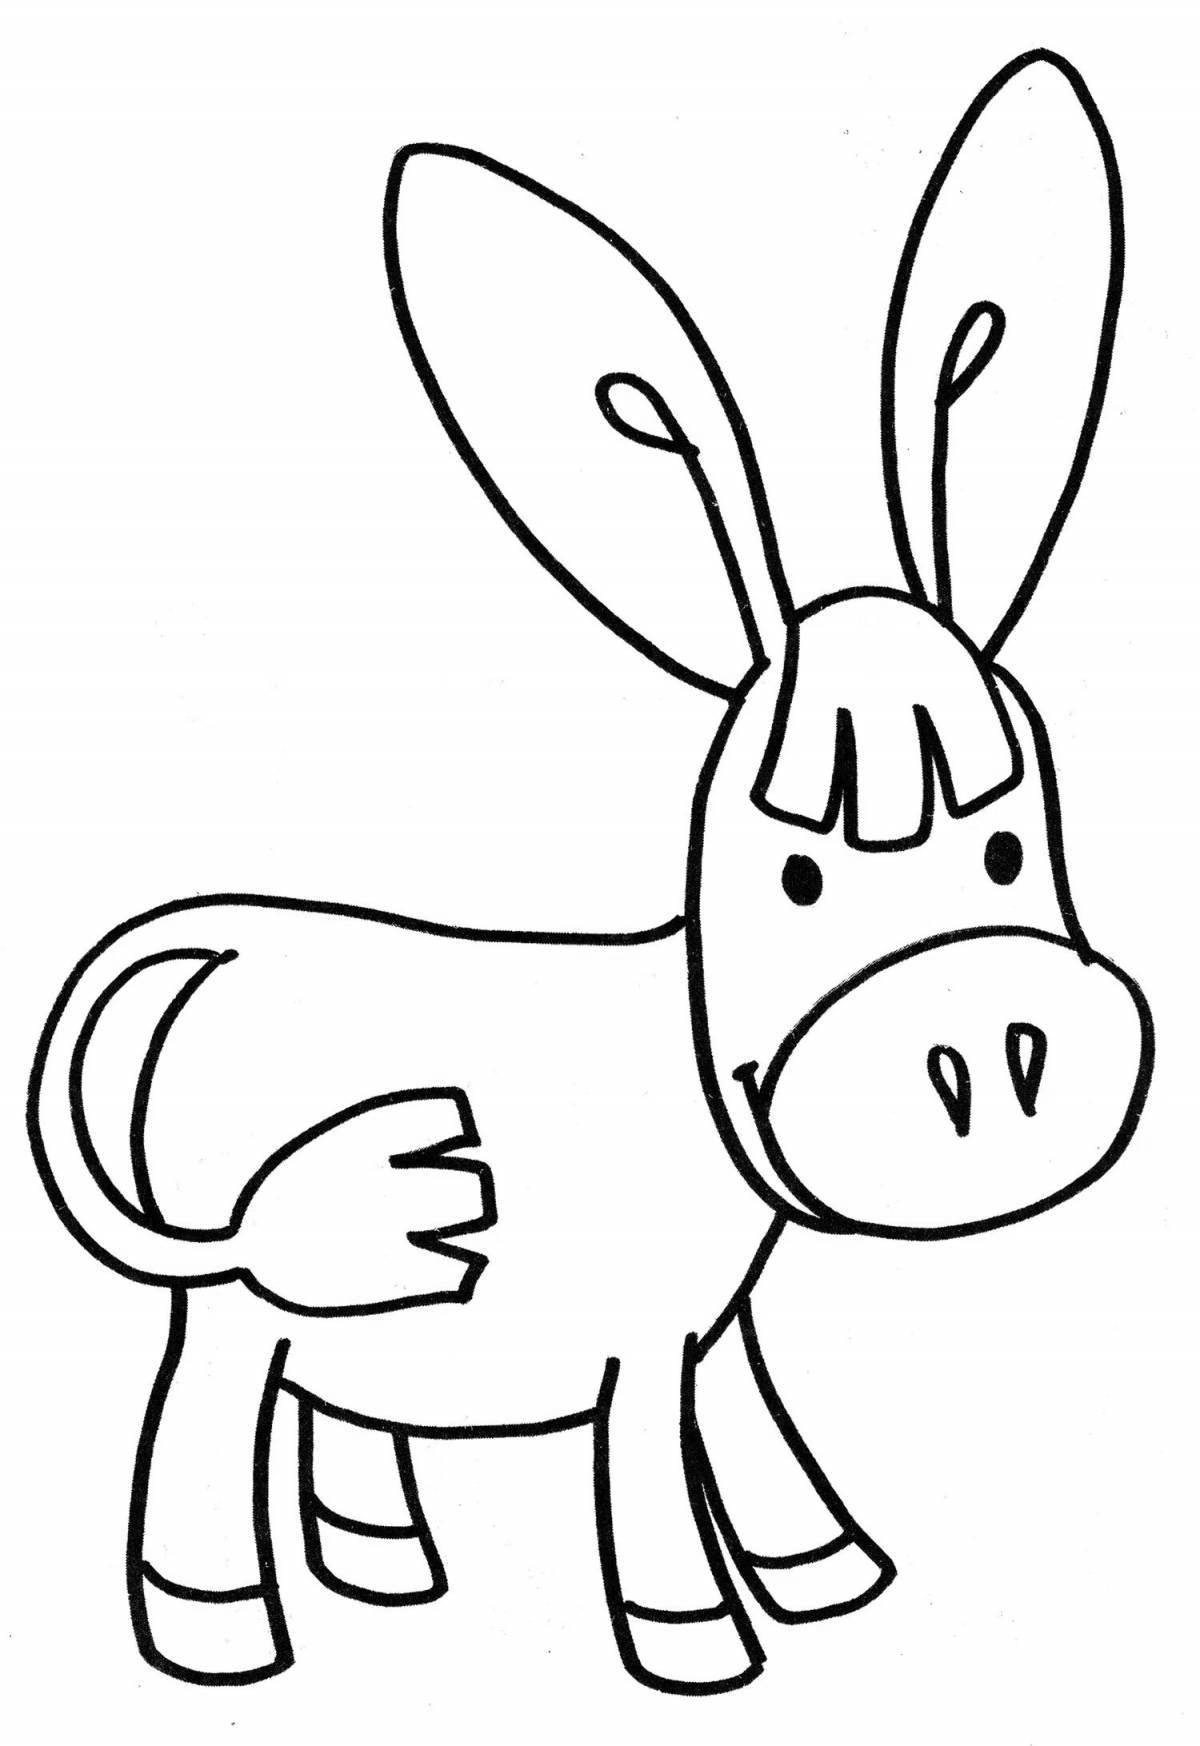 Colourful donkey coloring book for kids